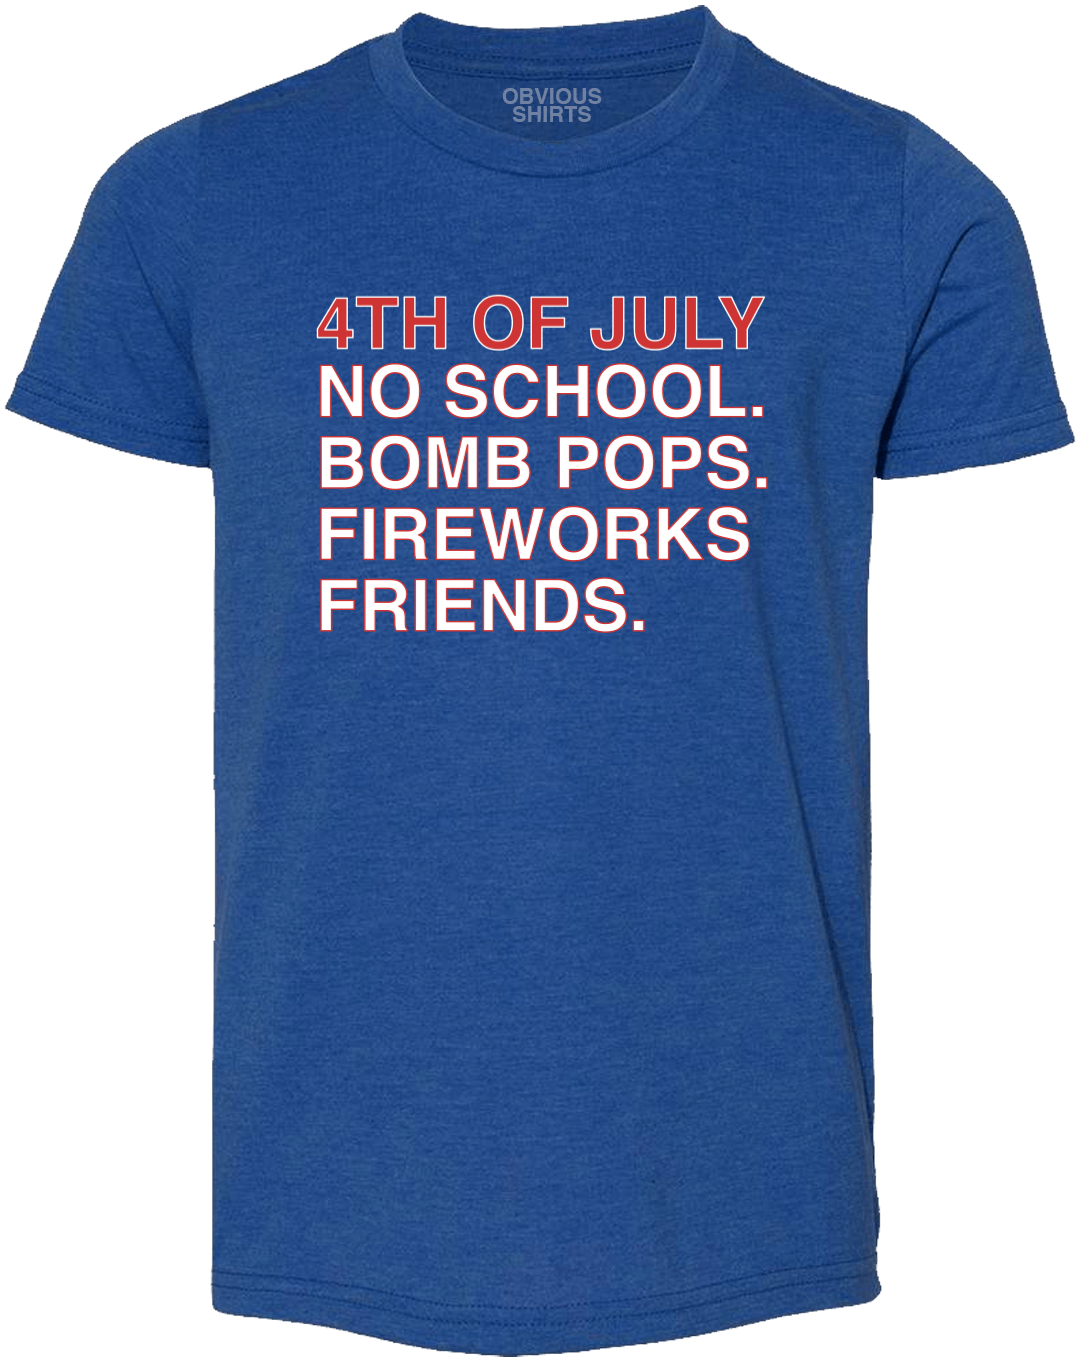 4TH OF JULY RULES. (YOUTH) - OBVIOUS SHIRTS